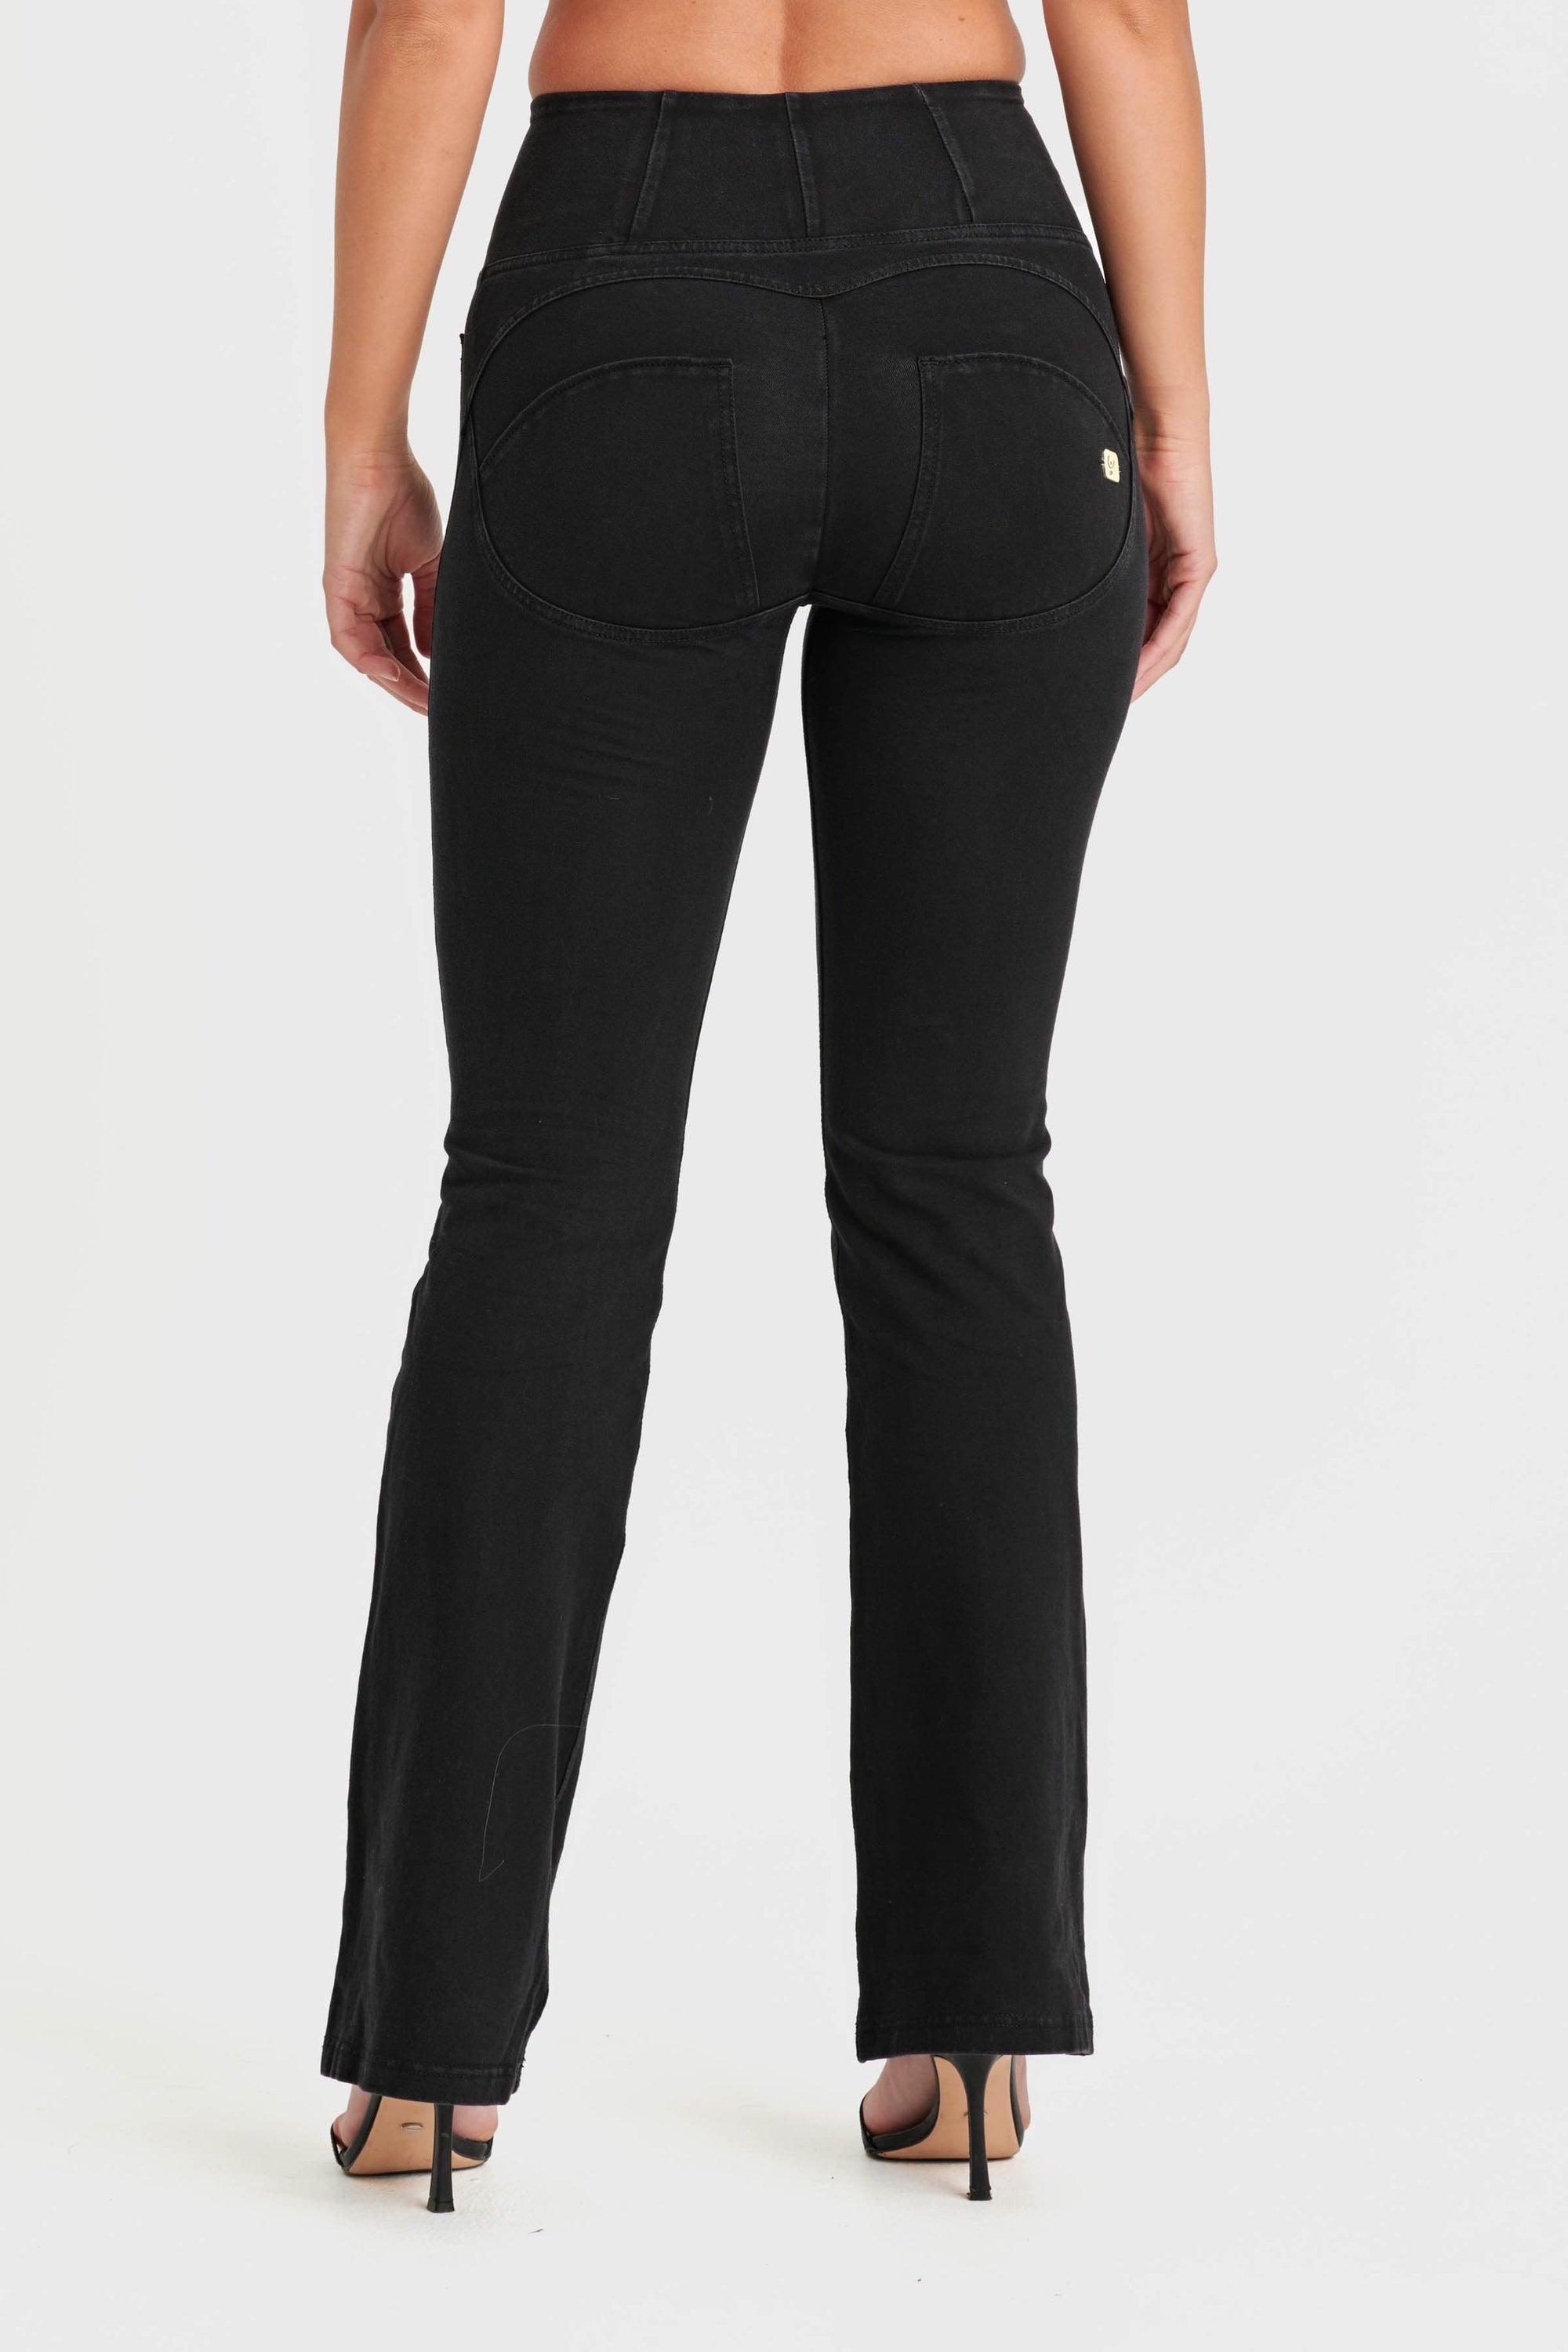 WR.UP® Denim with Front Pockets - Super High Waisted - Flare - Black + Black Stitching 6